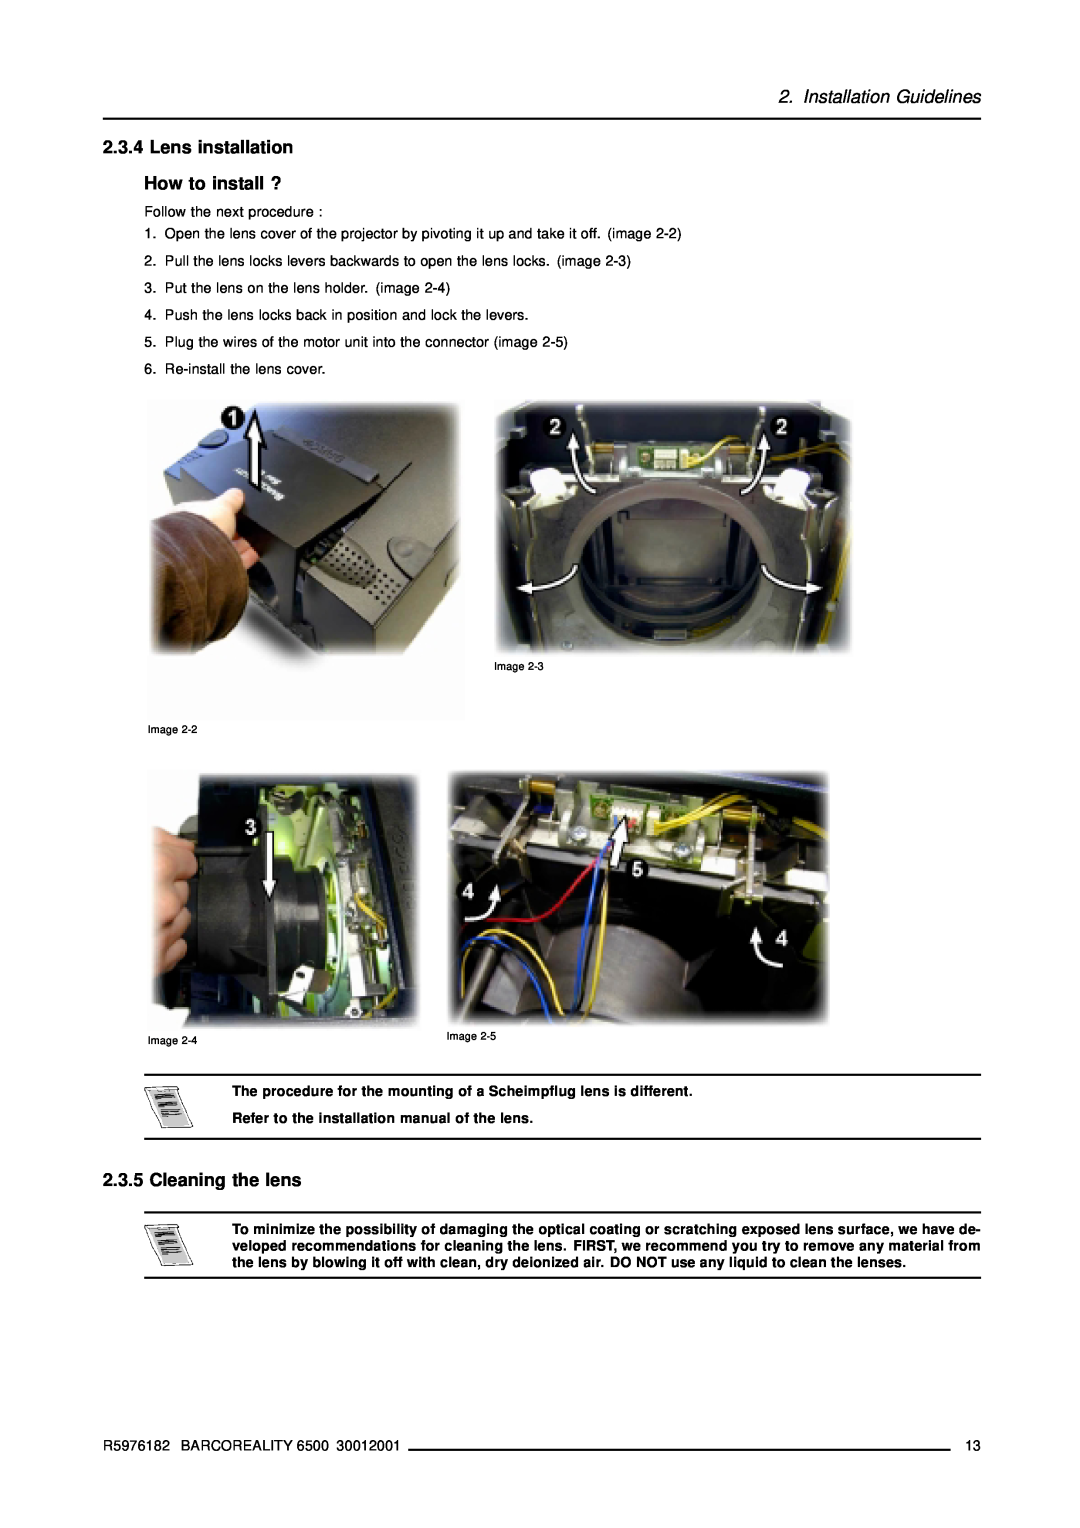 Barco R9001960 Lens installation How to install ?, Cleaning the lens, Refer to the installation manual of the lens 